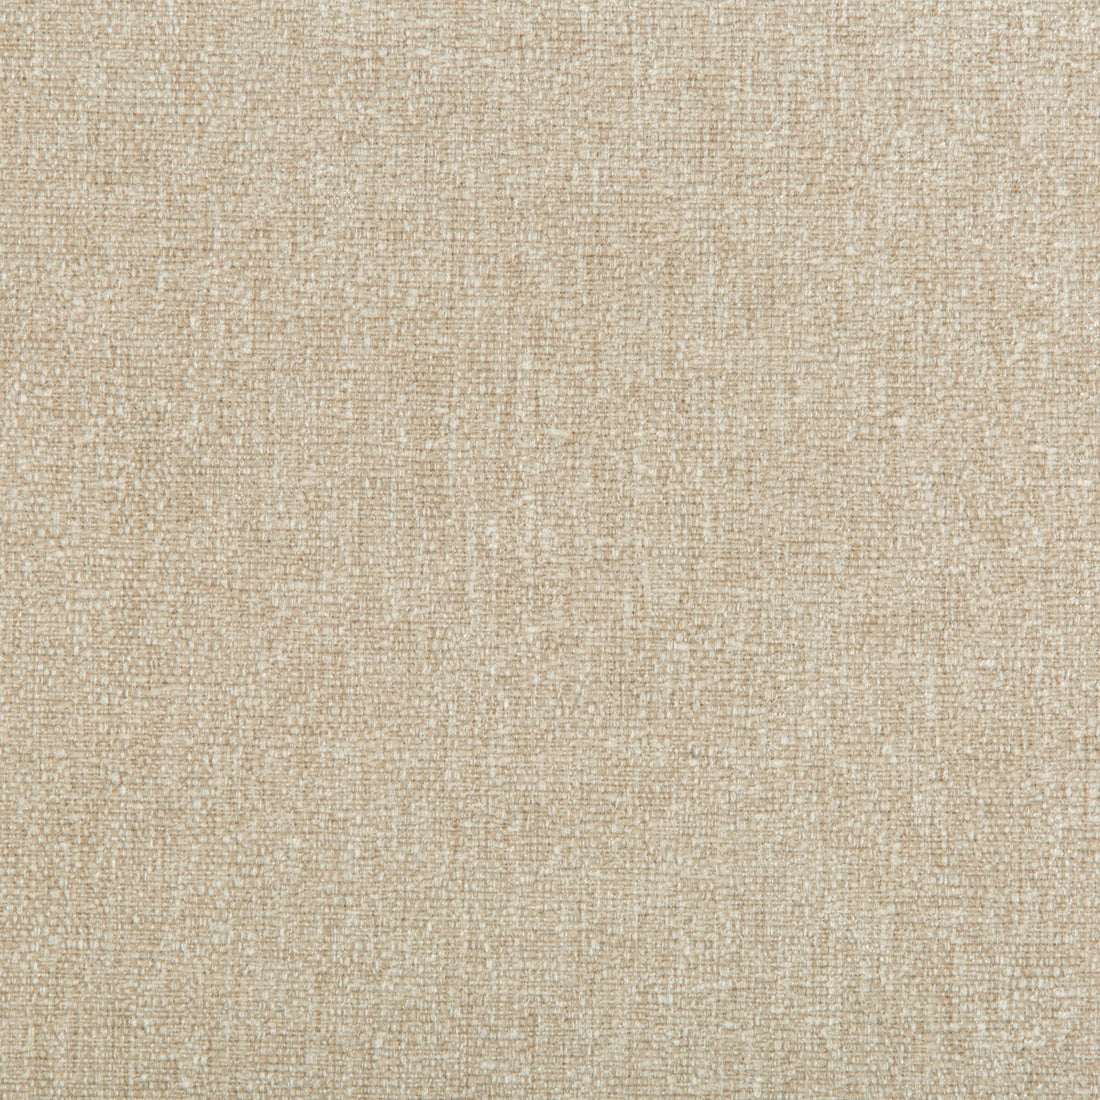 Kravet Smart fabric in 35391-16 color - pattern 35391.16.0 - by Kravet Smart in the Performance Crypton Home collection